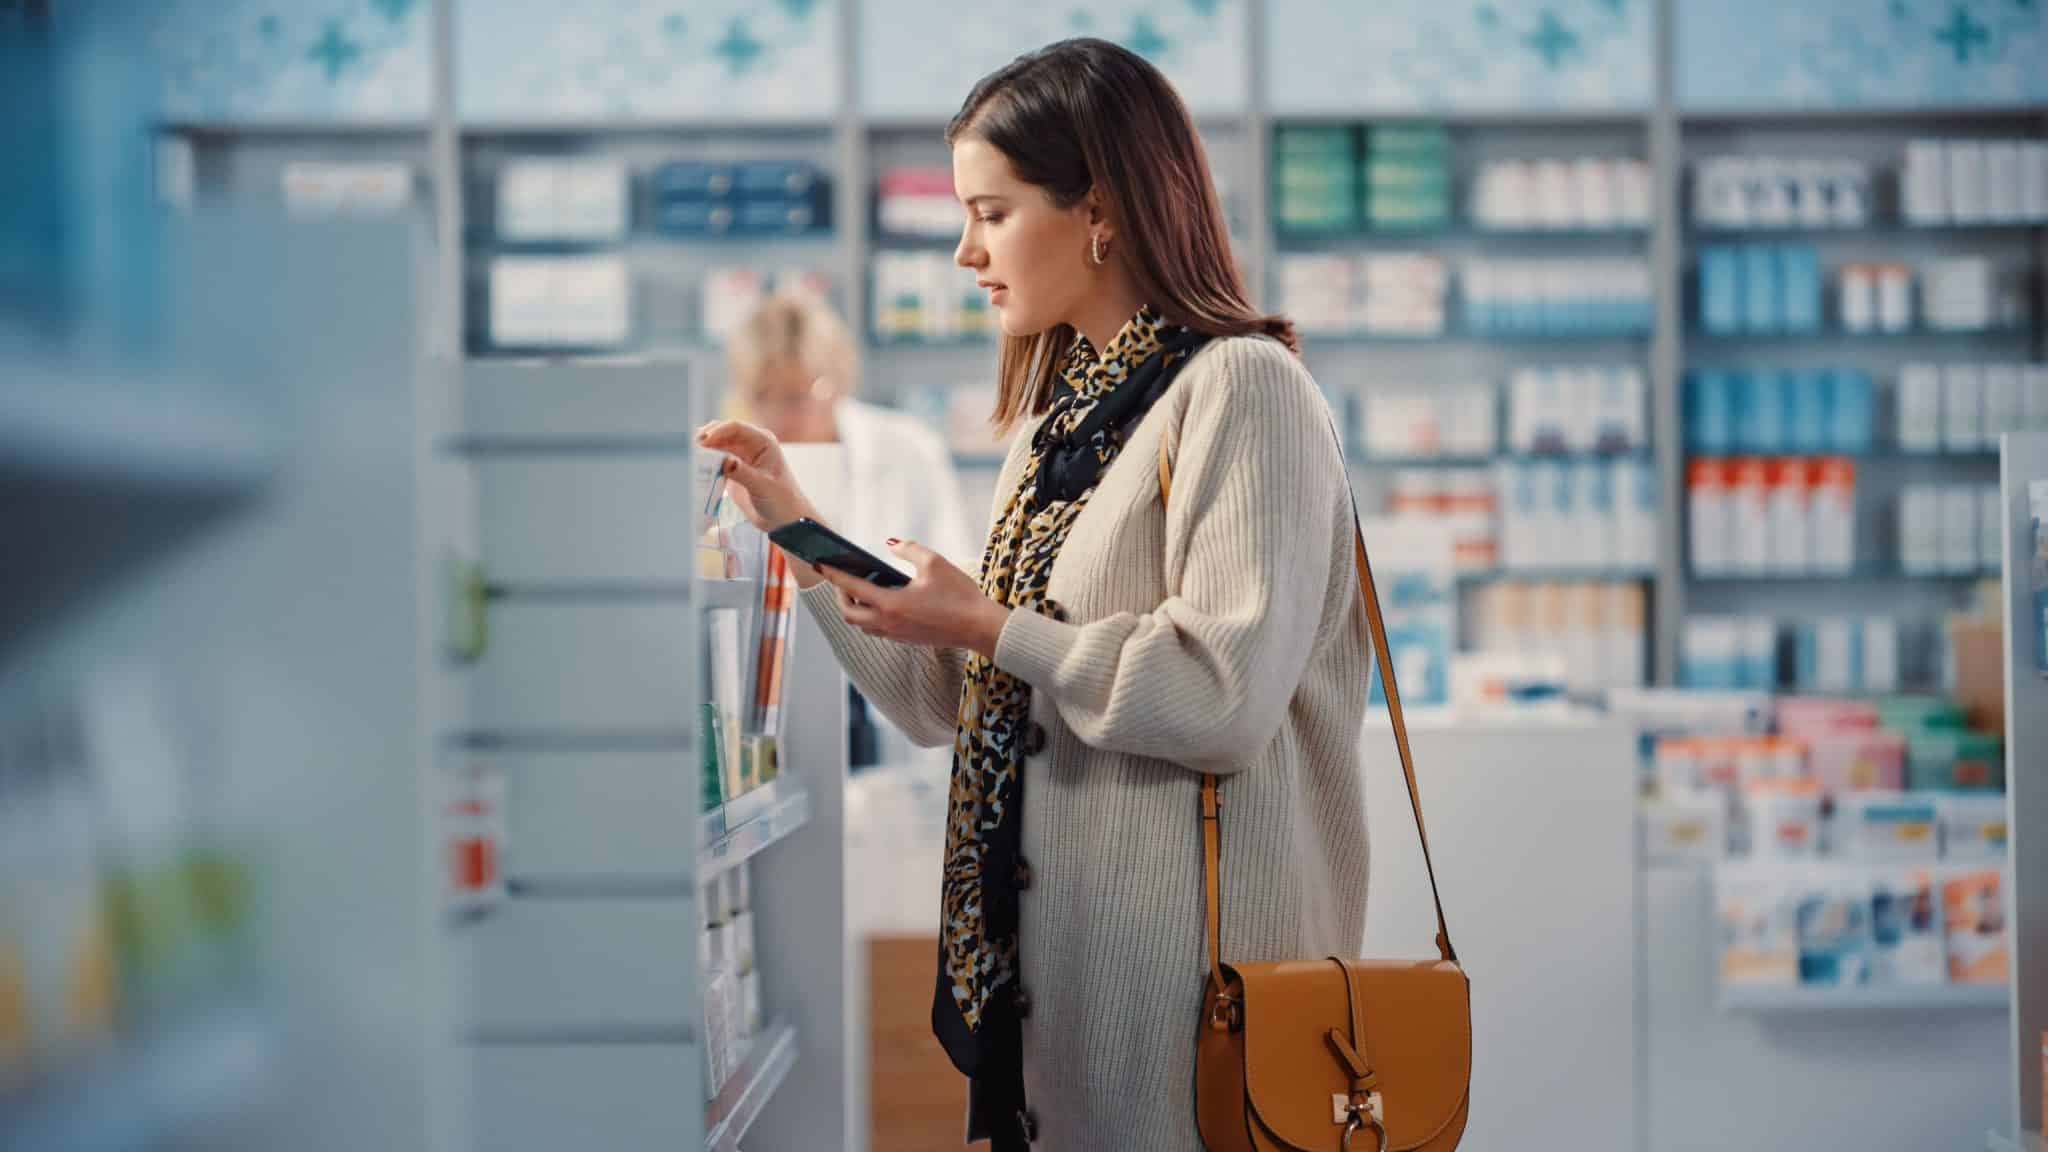 Pharmacy Drugstore: Portrait of Beautiful Young Woman Uses Smartphone, Searches to Buy Best Medicine, Drugs, Vitamins, Supplements. Shelves full of Health Care, Welness, Beauty, Cosmetics Products